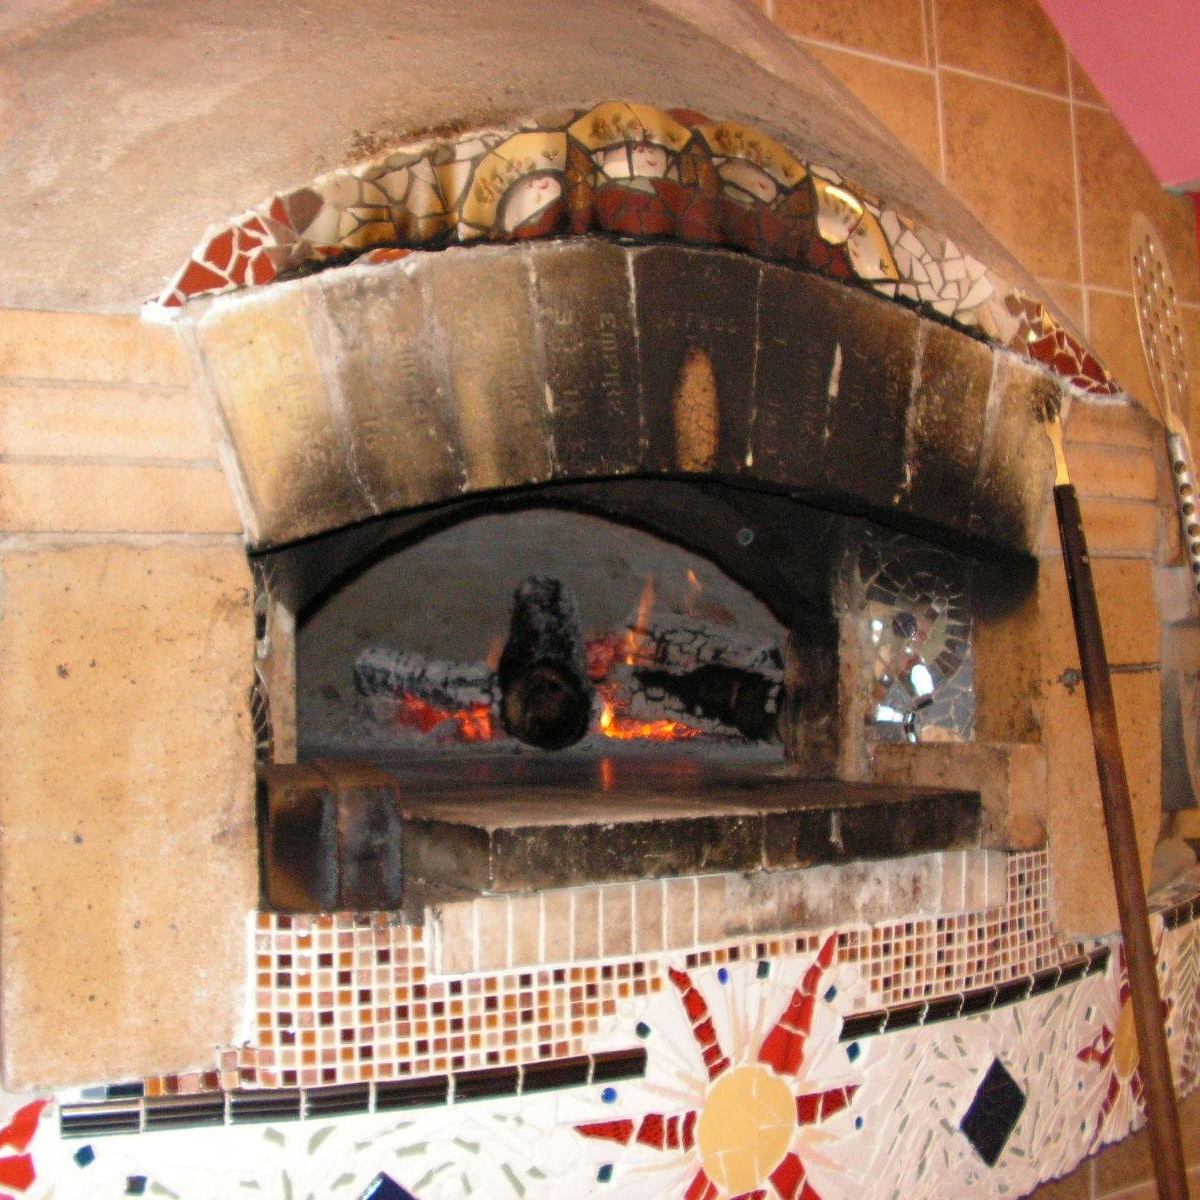 Arty's Wood Fired Pizza